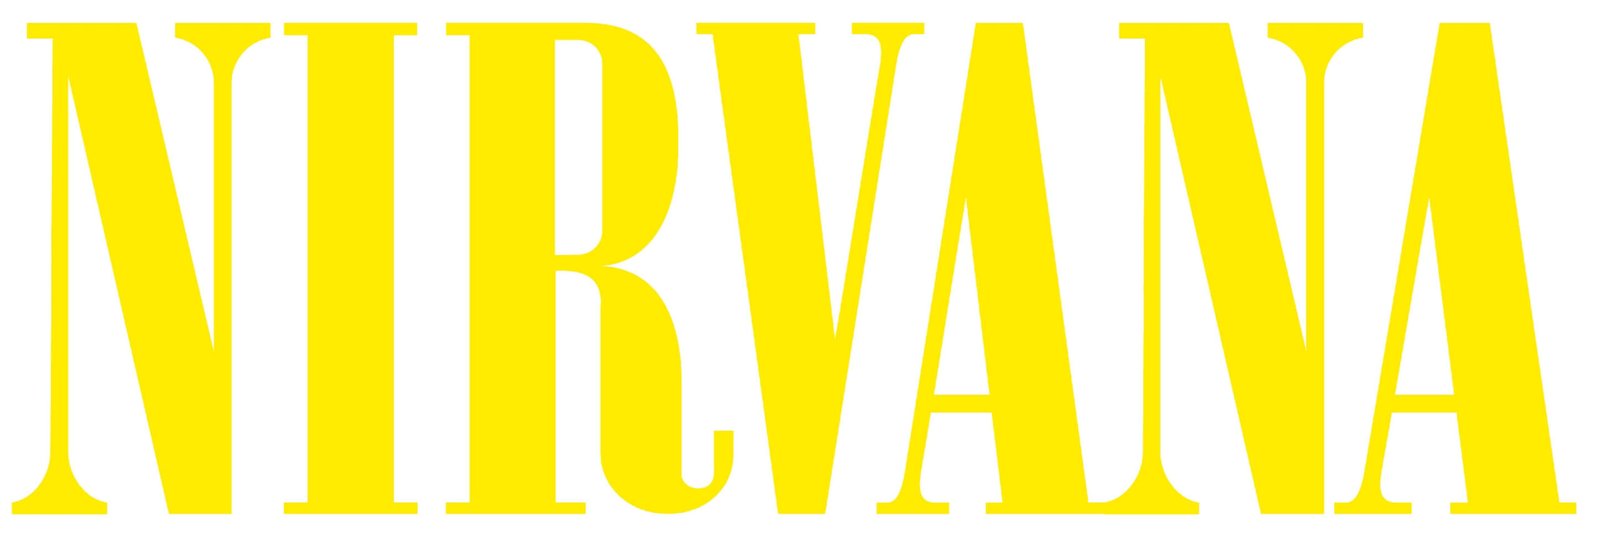 Nirvana logo and the history of the band